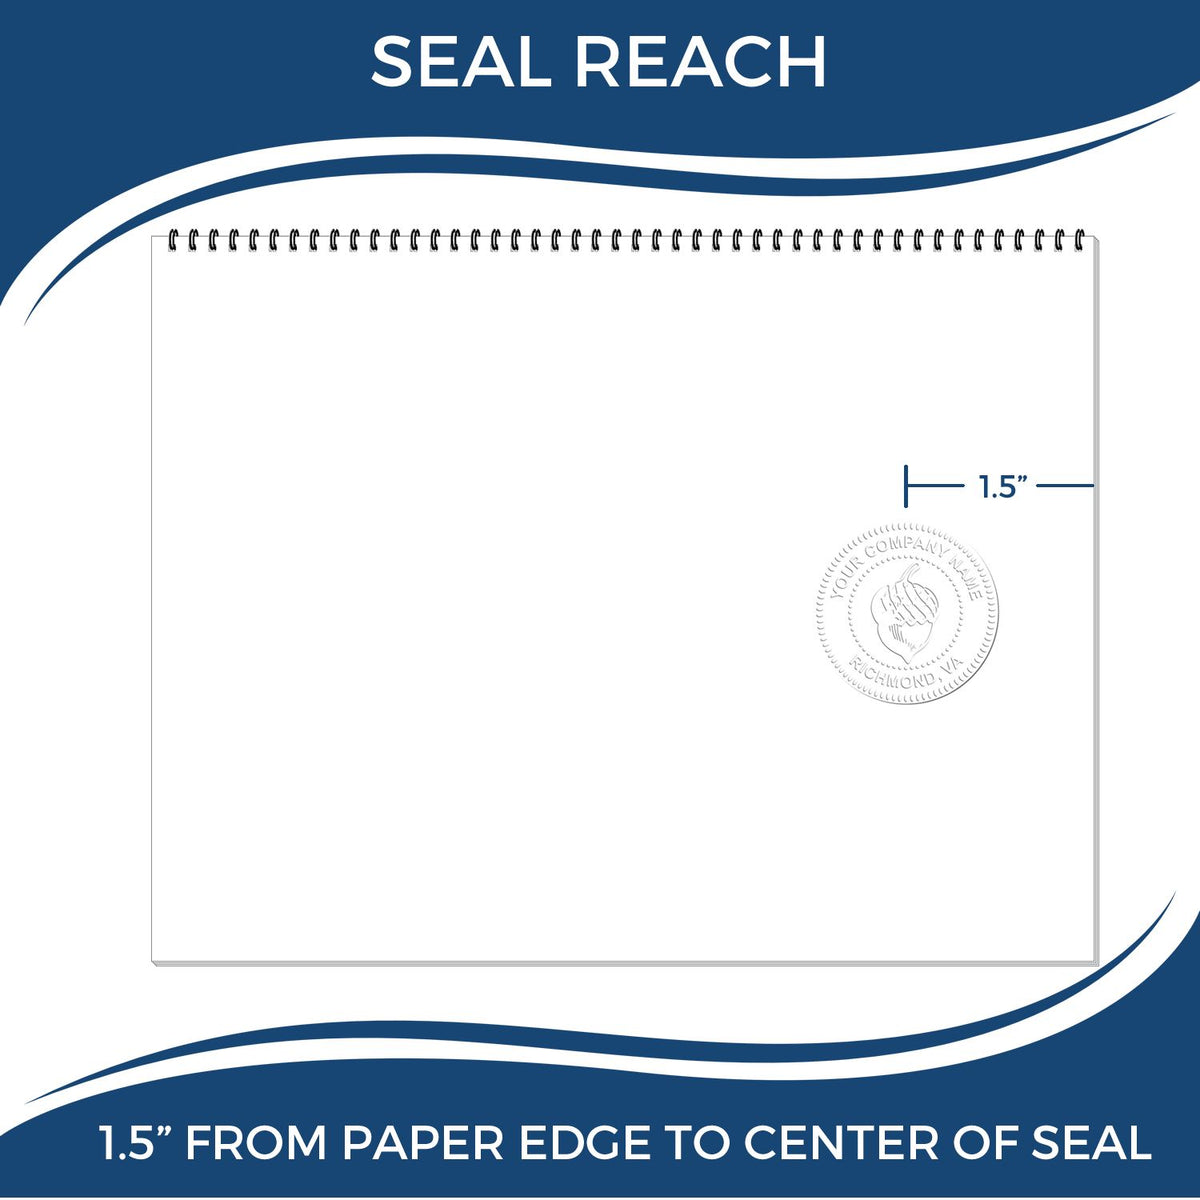 An infographic showing the seal reach which is represented by a ruler and a miniature seal image of the Gift New Hampshire Geologist Seal